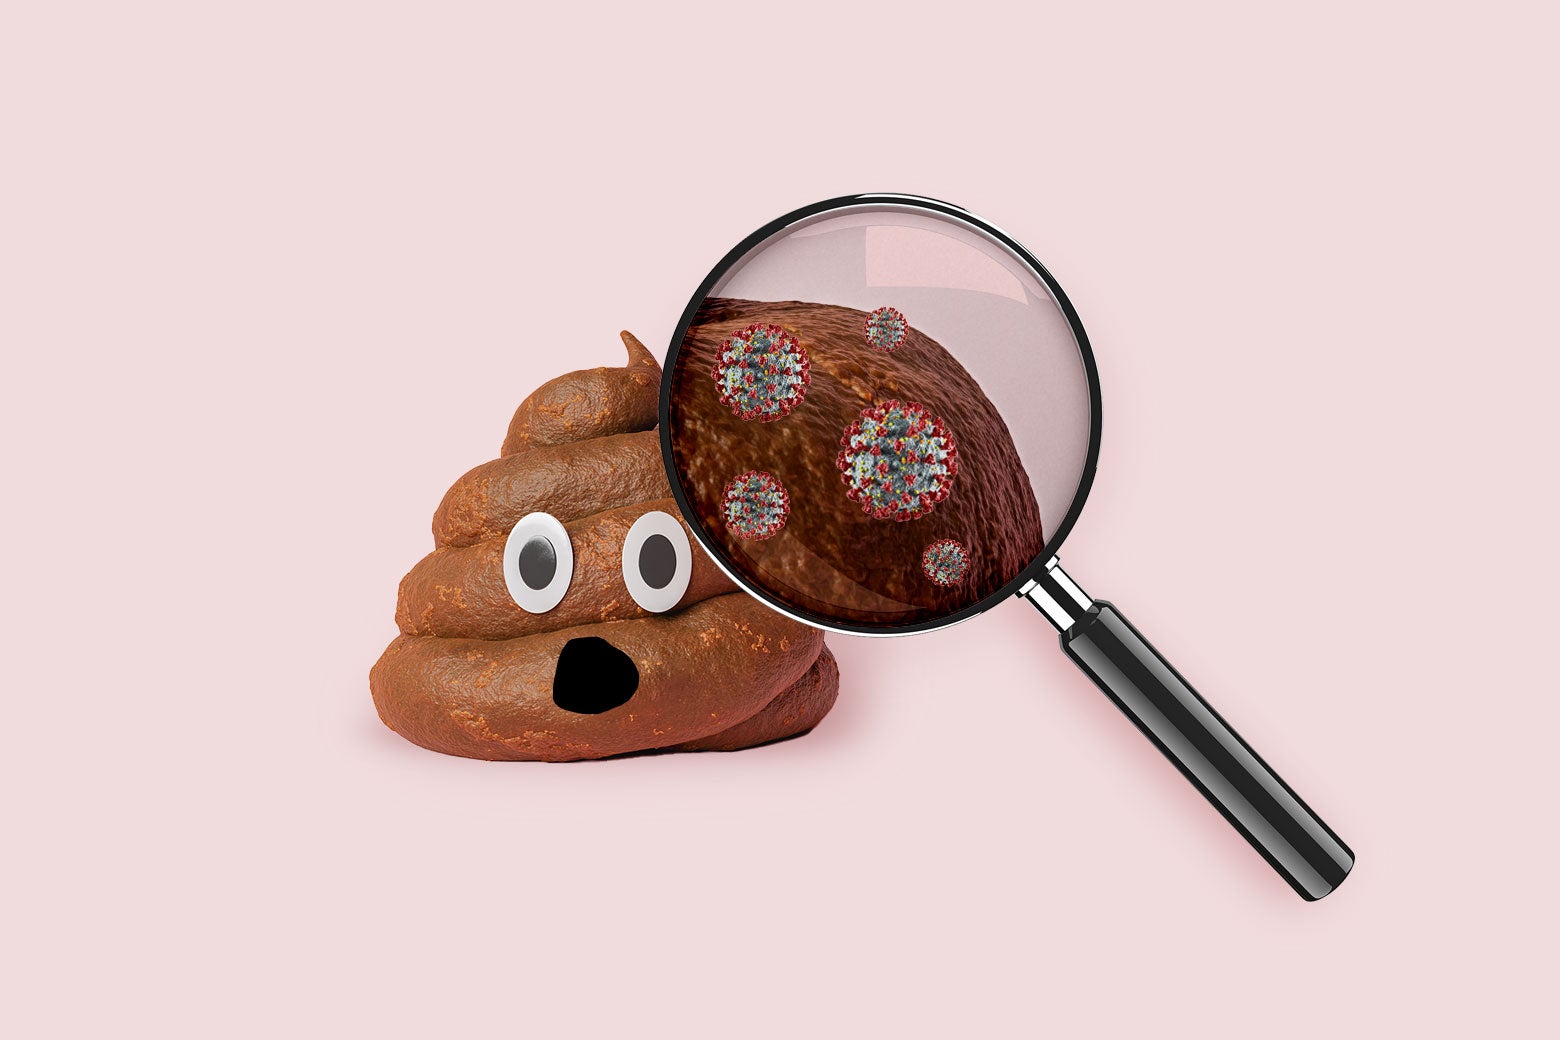 A magnifying glass hovers over a terrified-looking emoji poo with googly eyes. Under the magnifying glass are multiple little COVID-19 viruses.